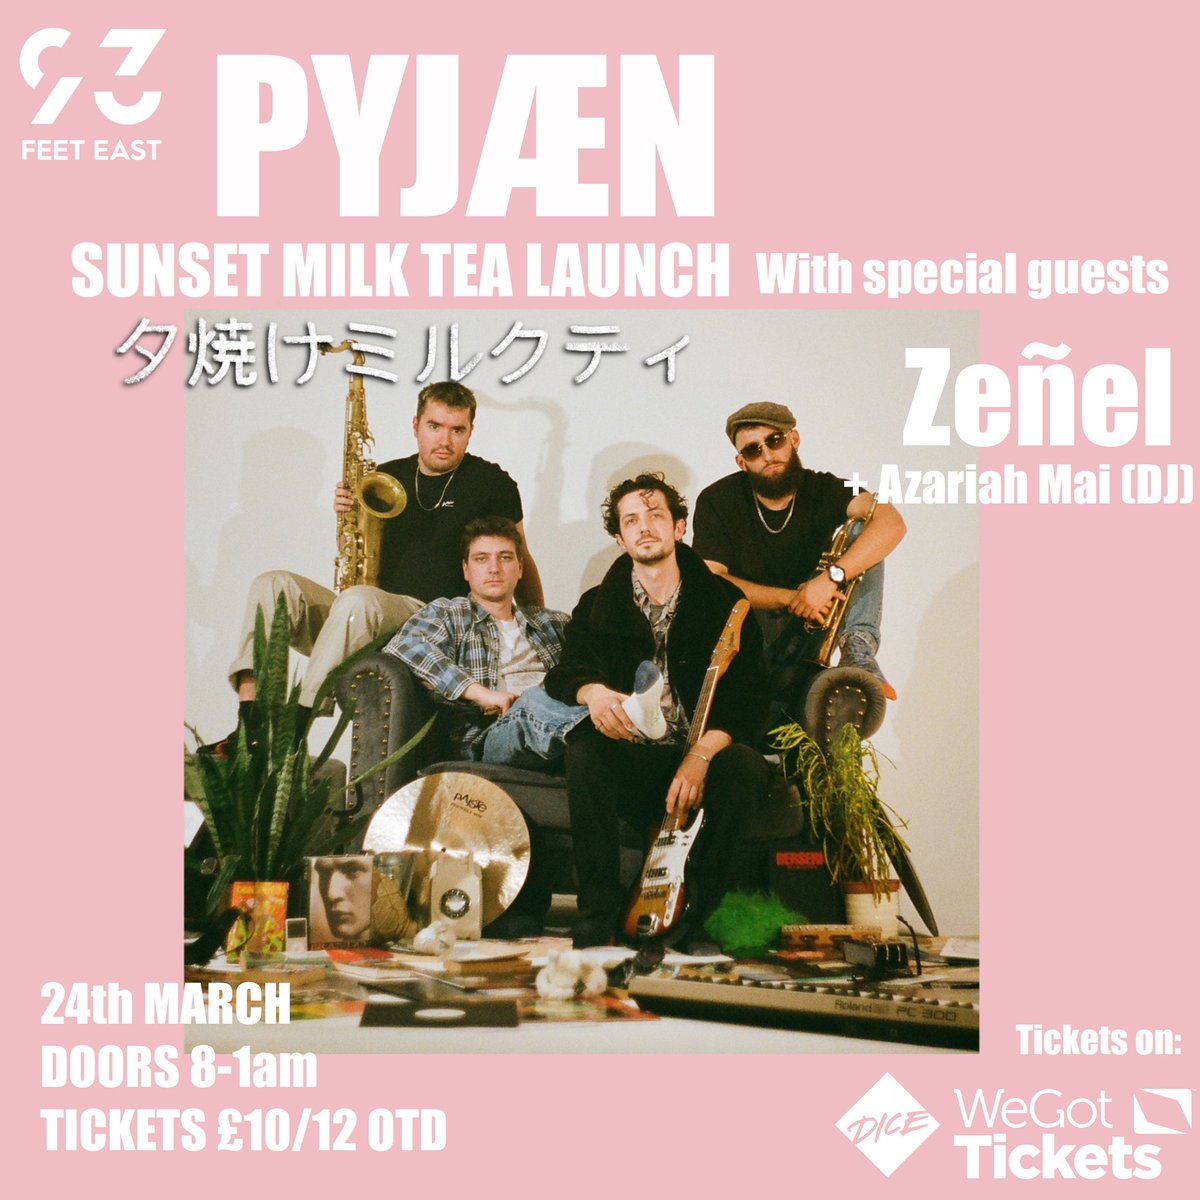 EP LAUNCH 24th March !! @93FeetEast with @zenelmusic @azariah_sheeley and other guests to be announced 👀 tickets 👉link.dice.fm/QpVz3bKpoxb 
.
.
.
#music #gigs #jazz #londonjazz #eplaunch #bricklane #party #pyjaen #rock #fusion